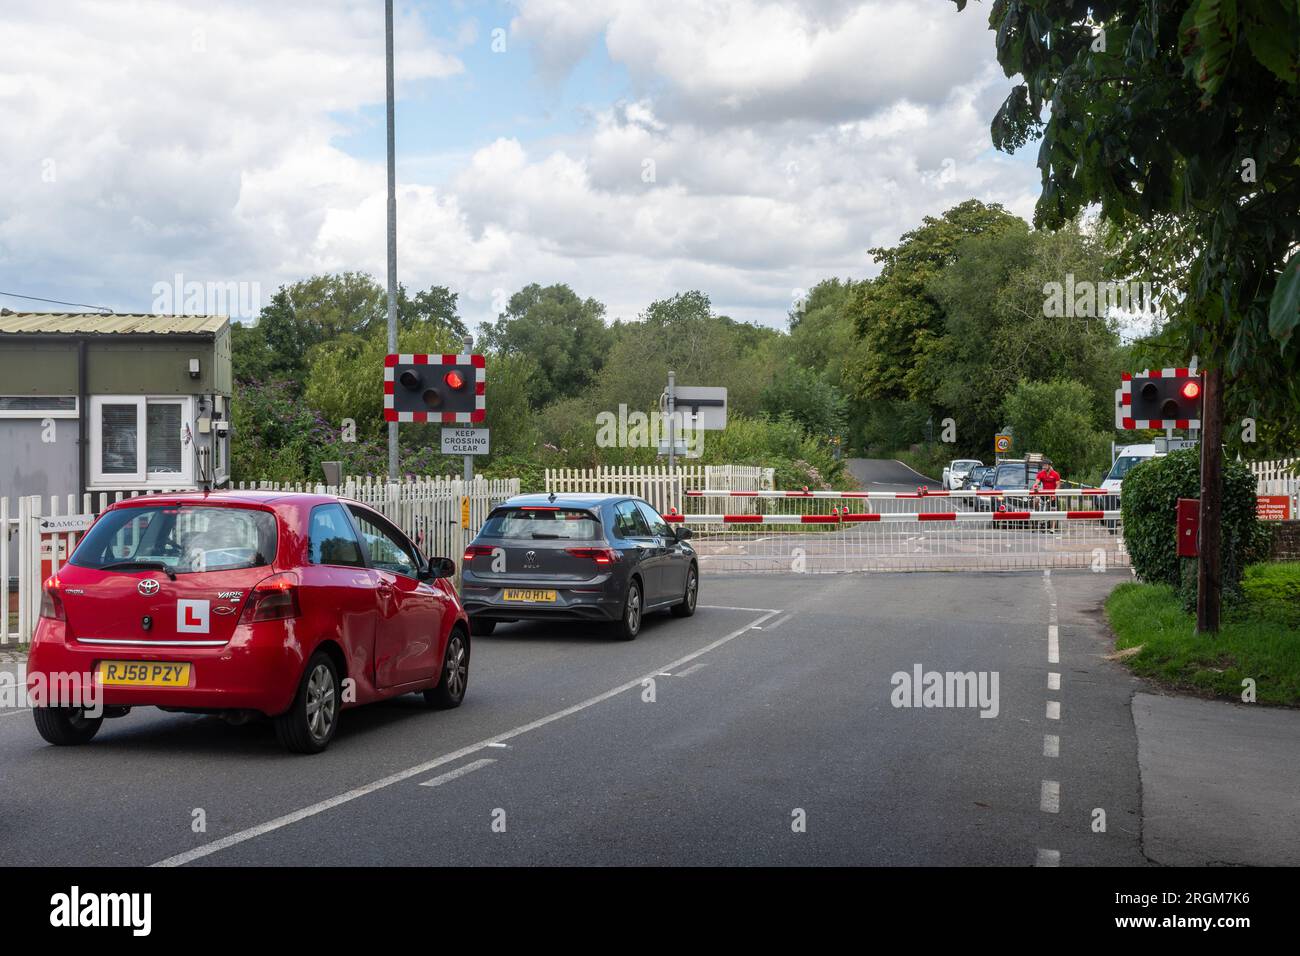 The level crossing at Kintbury, Berkshire, England, UK, with cars traffic and a cyclist waiting for the gates to open Stock Photo